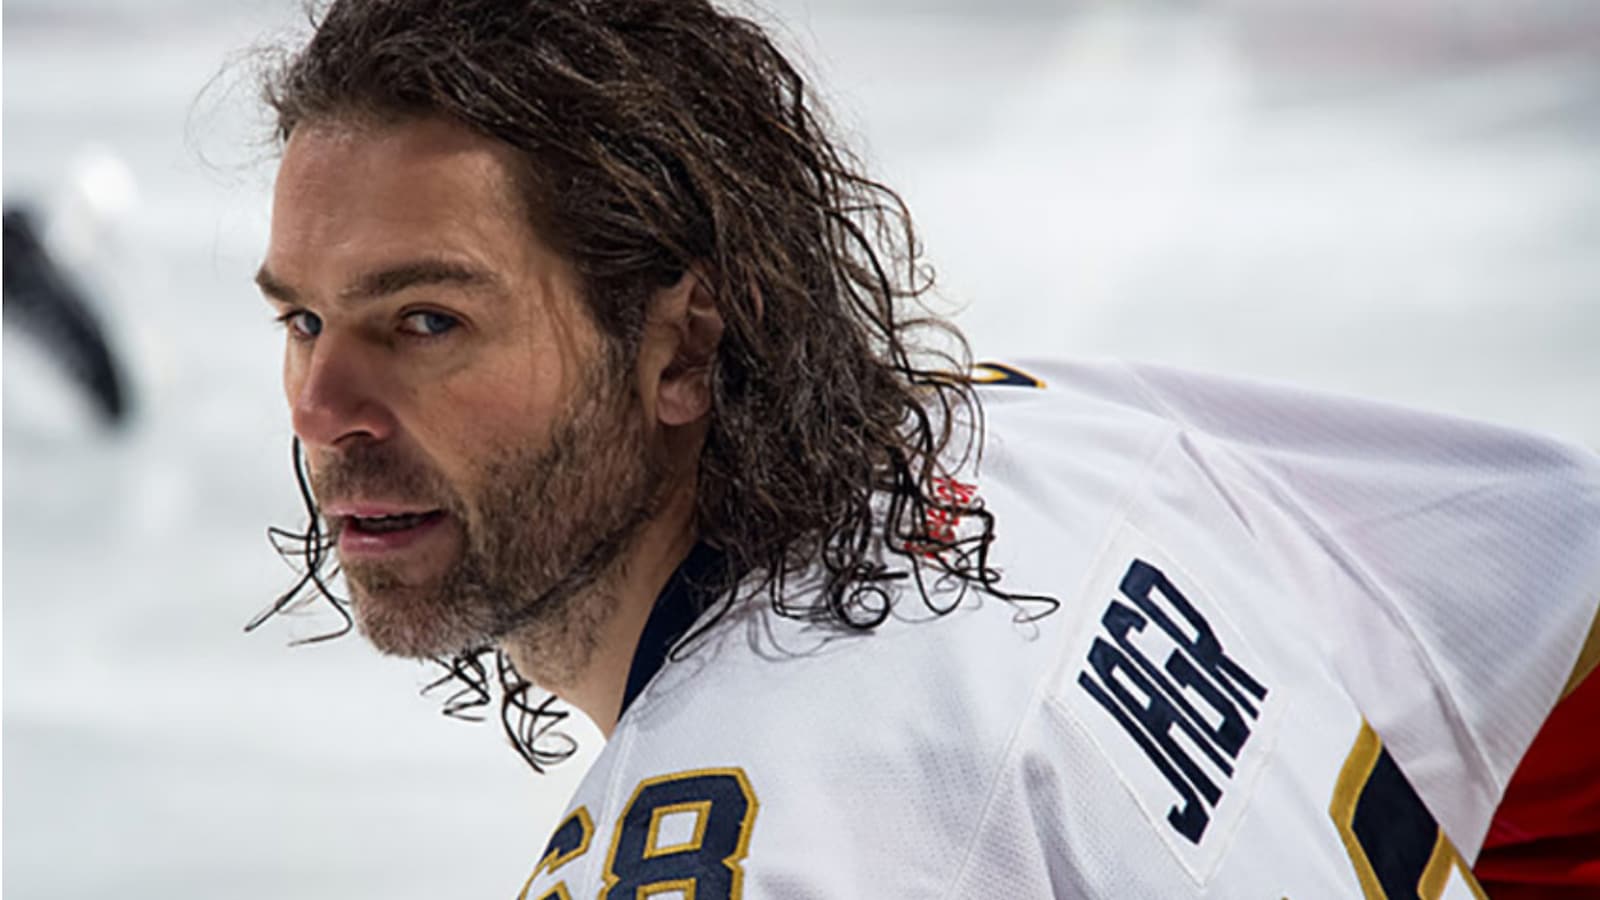 Jaromir Jagr Biography: Age, Career, Family, Personal Life, and Net Worth